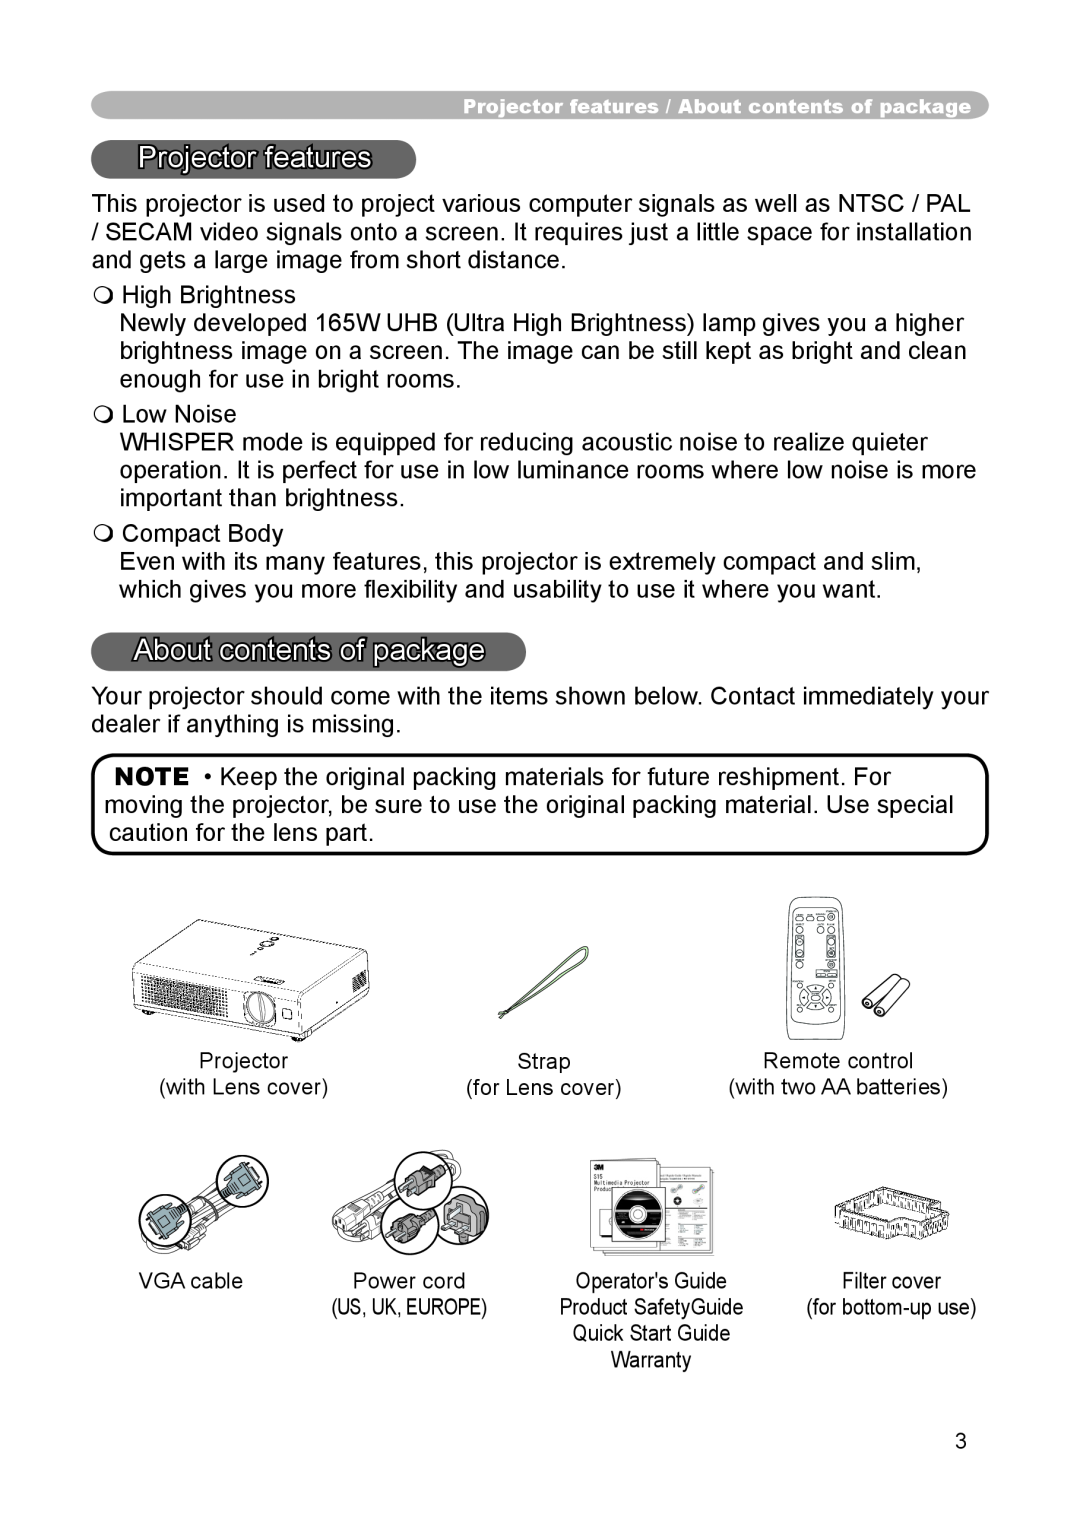 3M S15 manual Projector features, About contents of package 